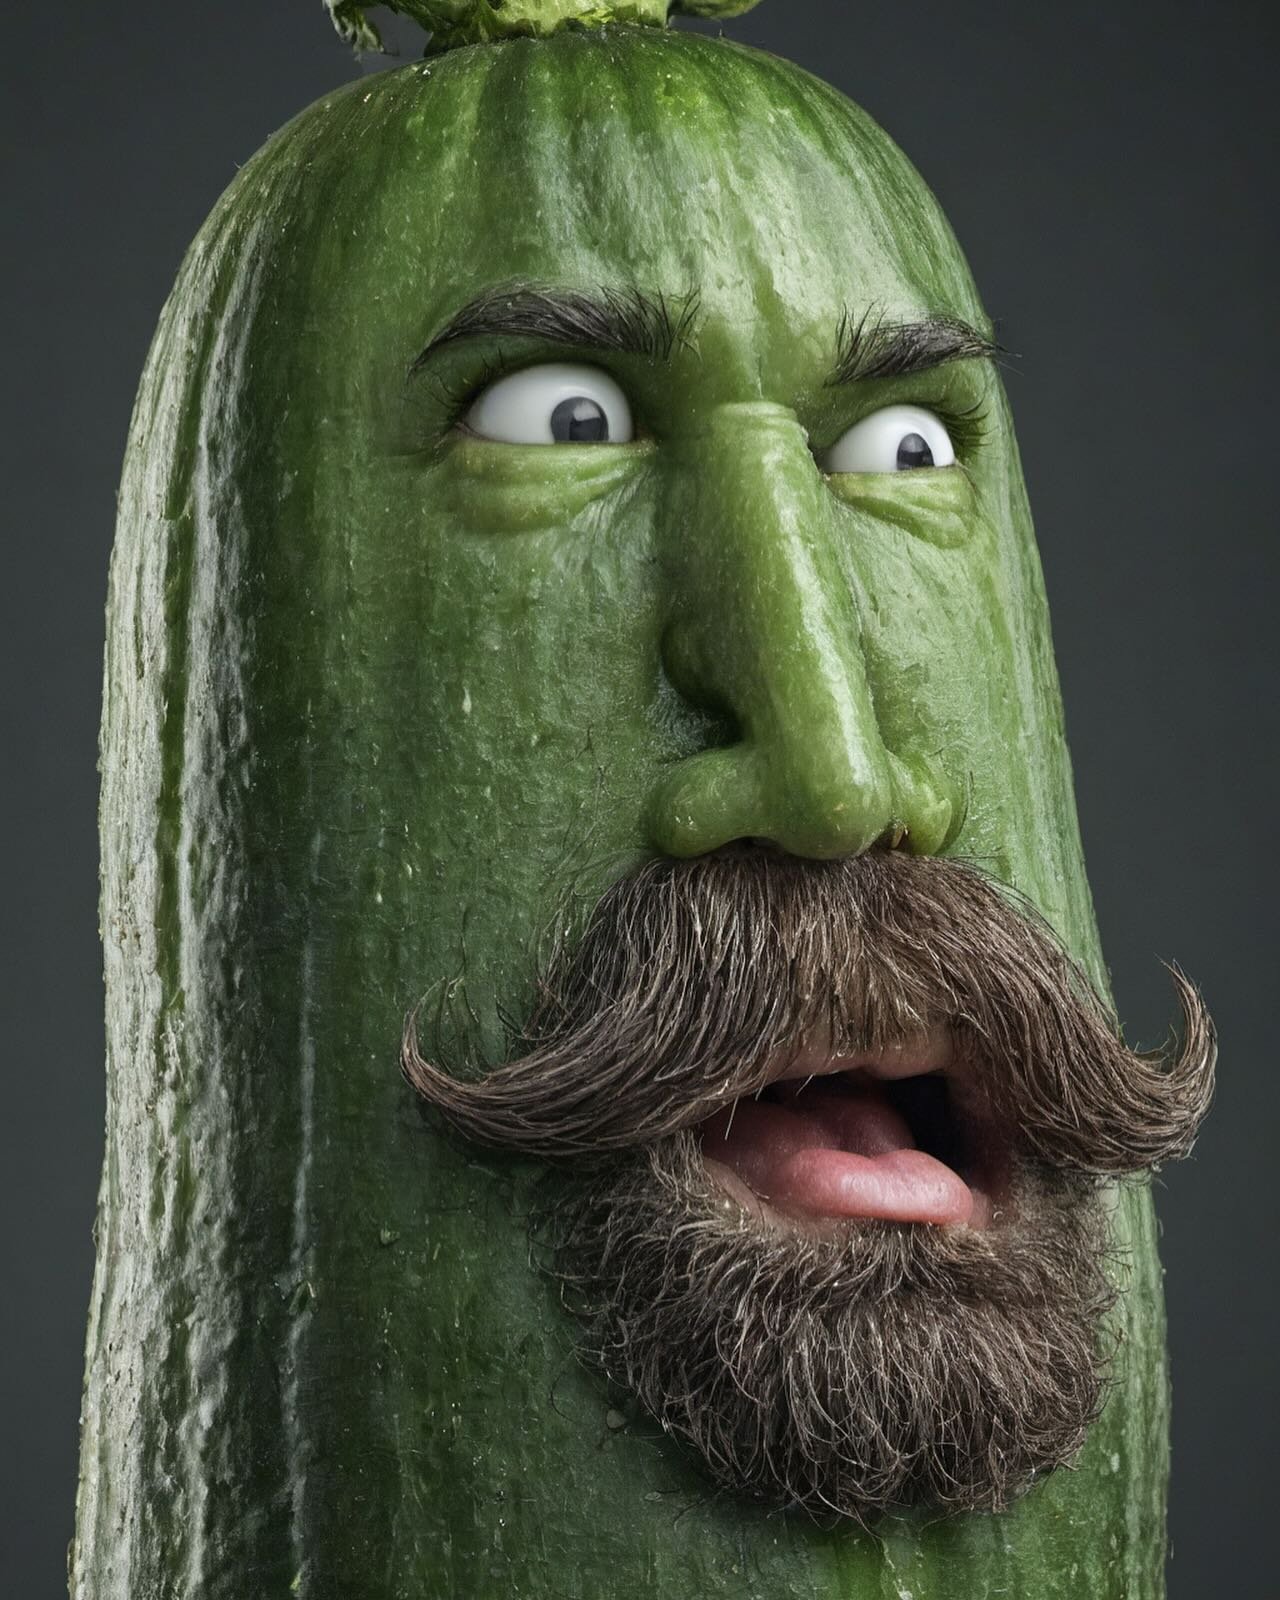 Try to do something beautiful with the mustache 🥸

#aiartist #socialmedia #artdirection #prompt #promptart #notmidjourney #ThePickle #cucumber